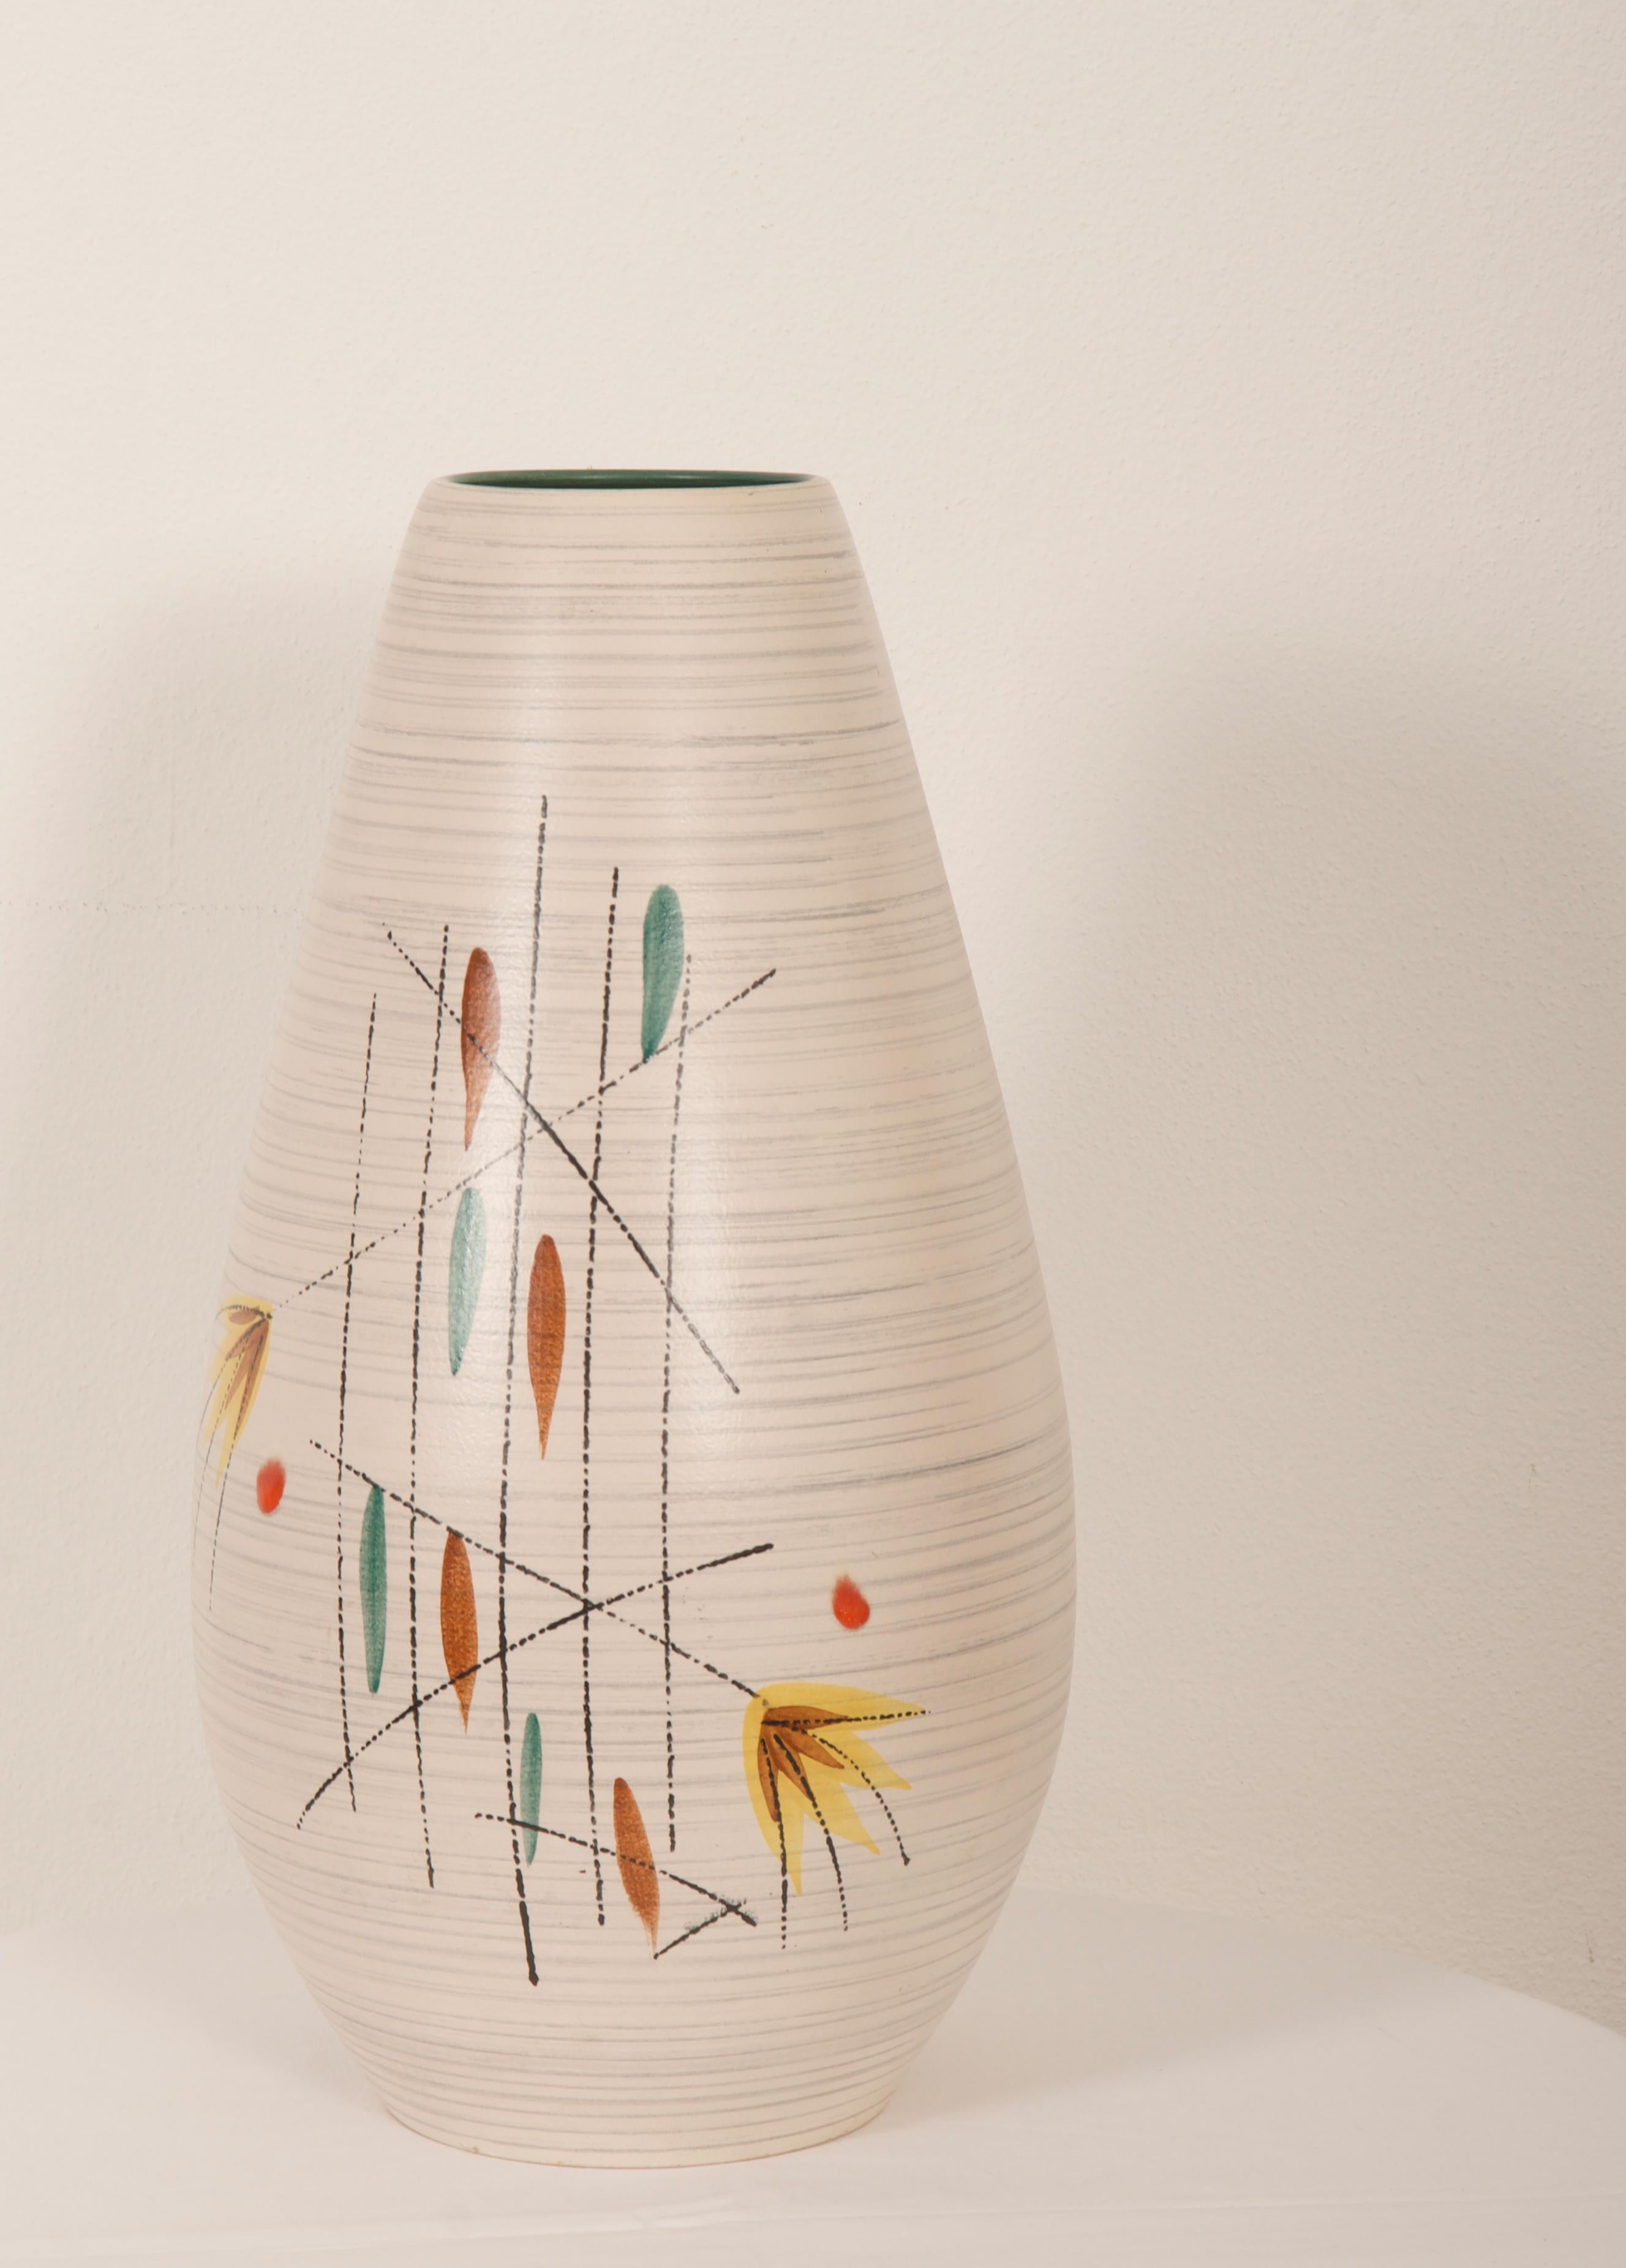 Mid-Century Modern ceramic floor vase hand painted with abstract motifs. Made in Germany in the 1960s